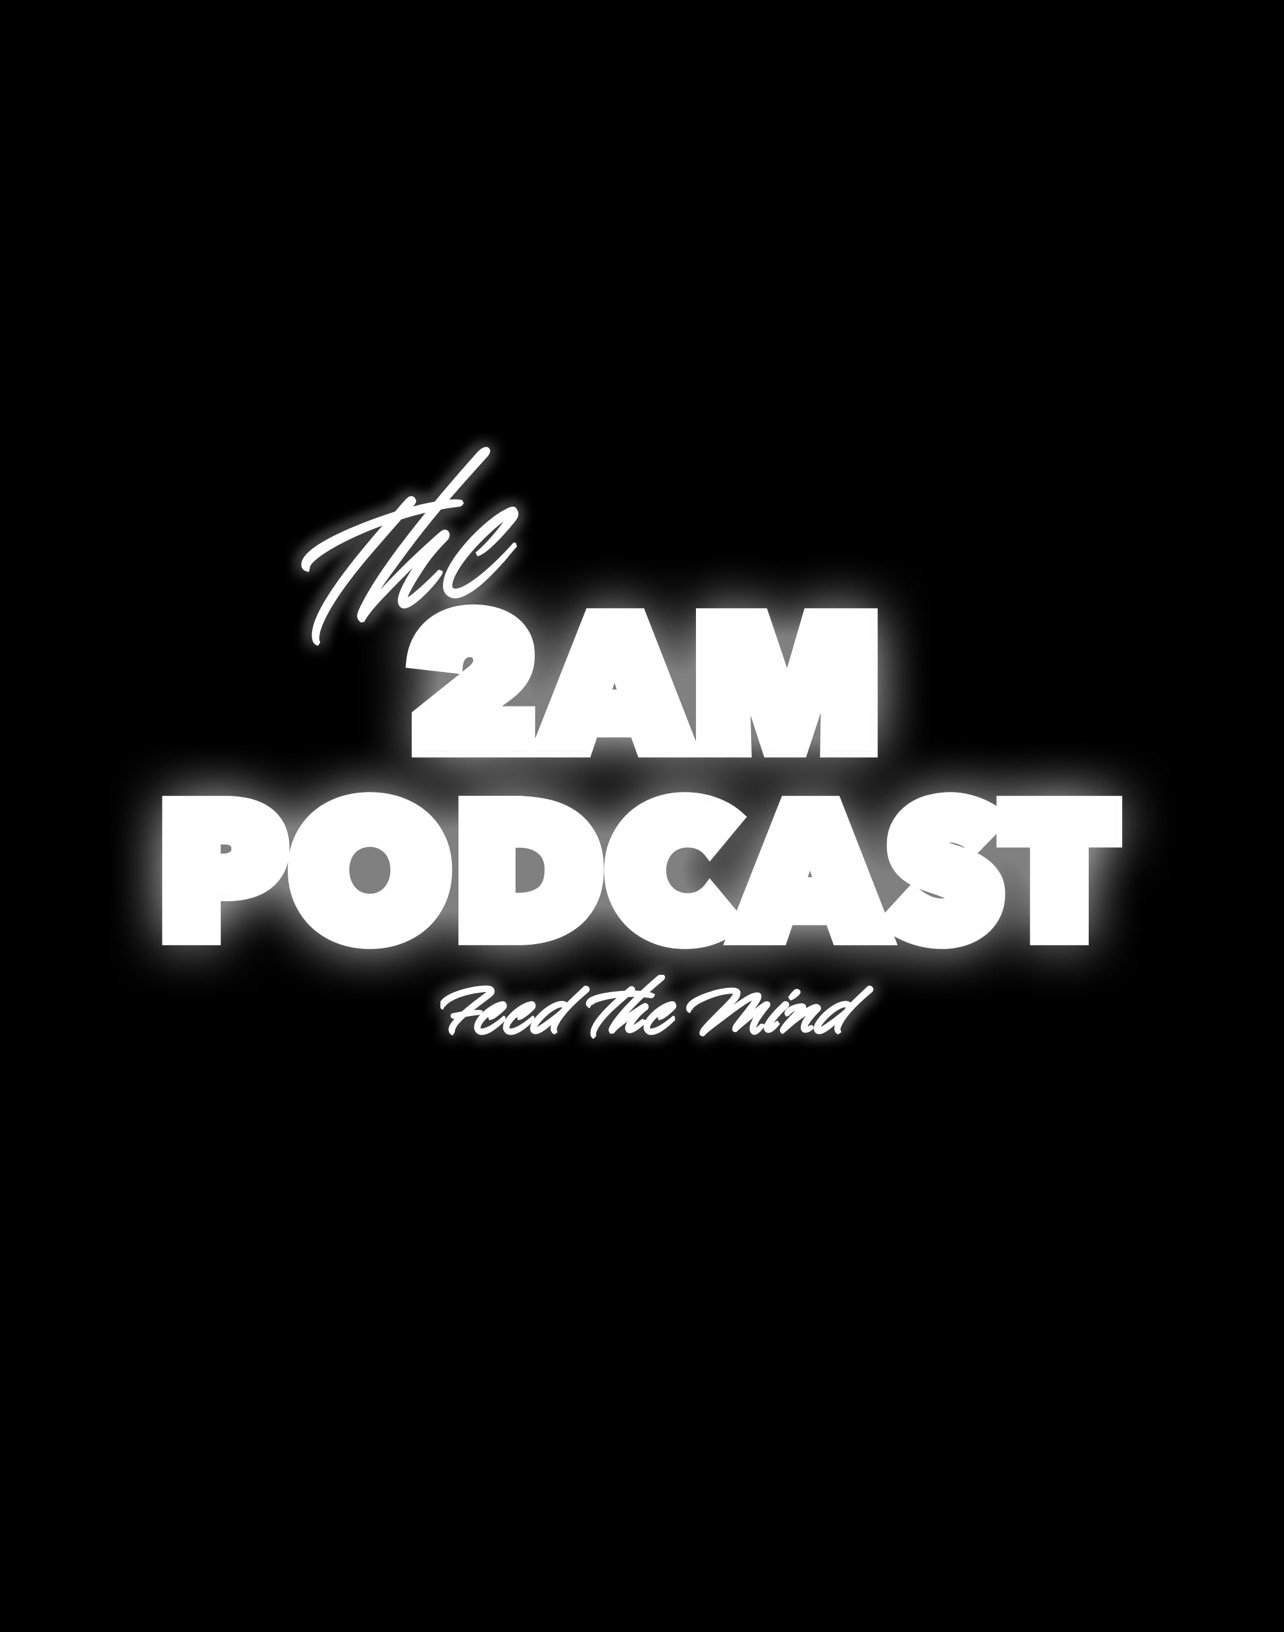 The 2AM Podcast